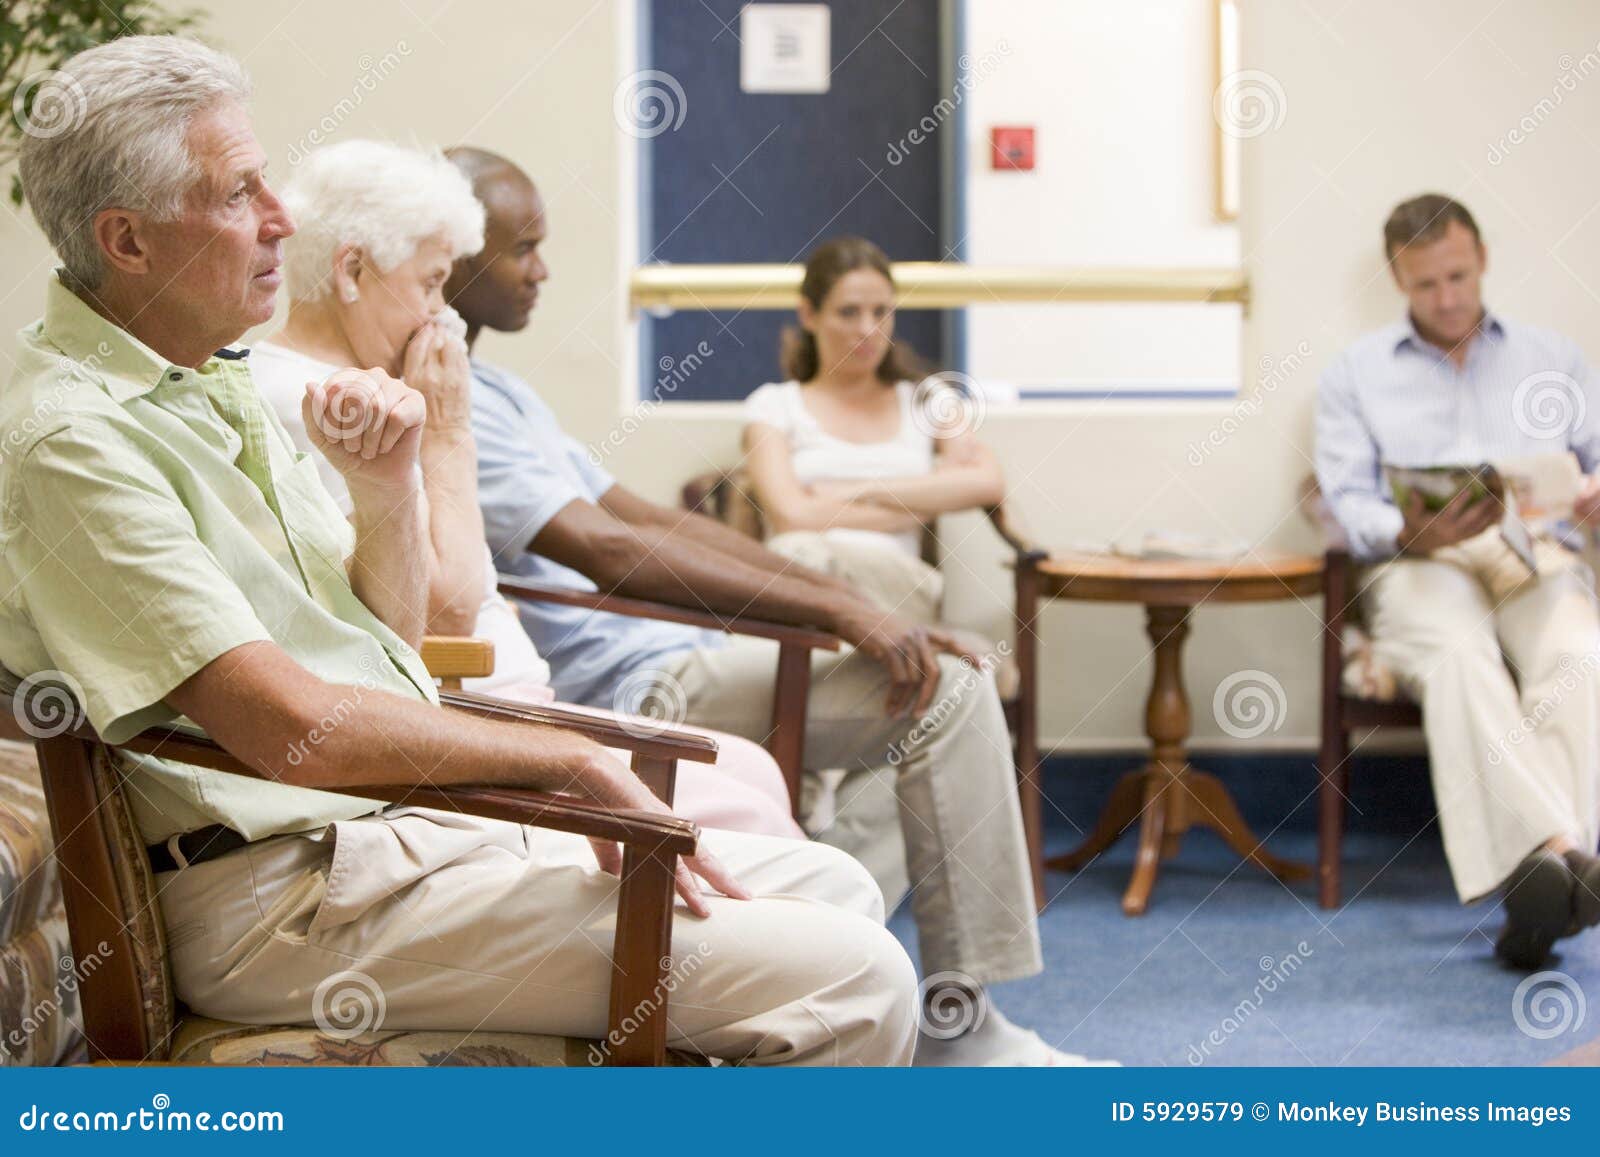 five people waiting in waiting room